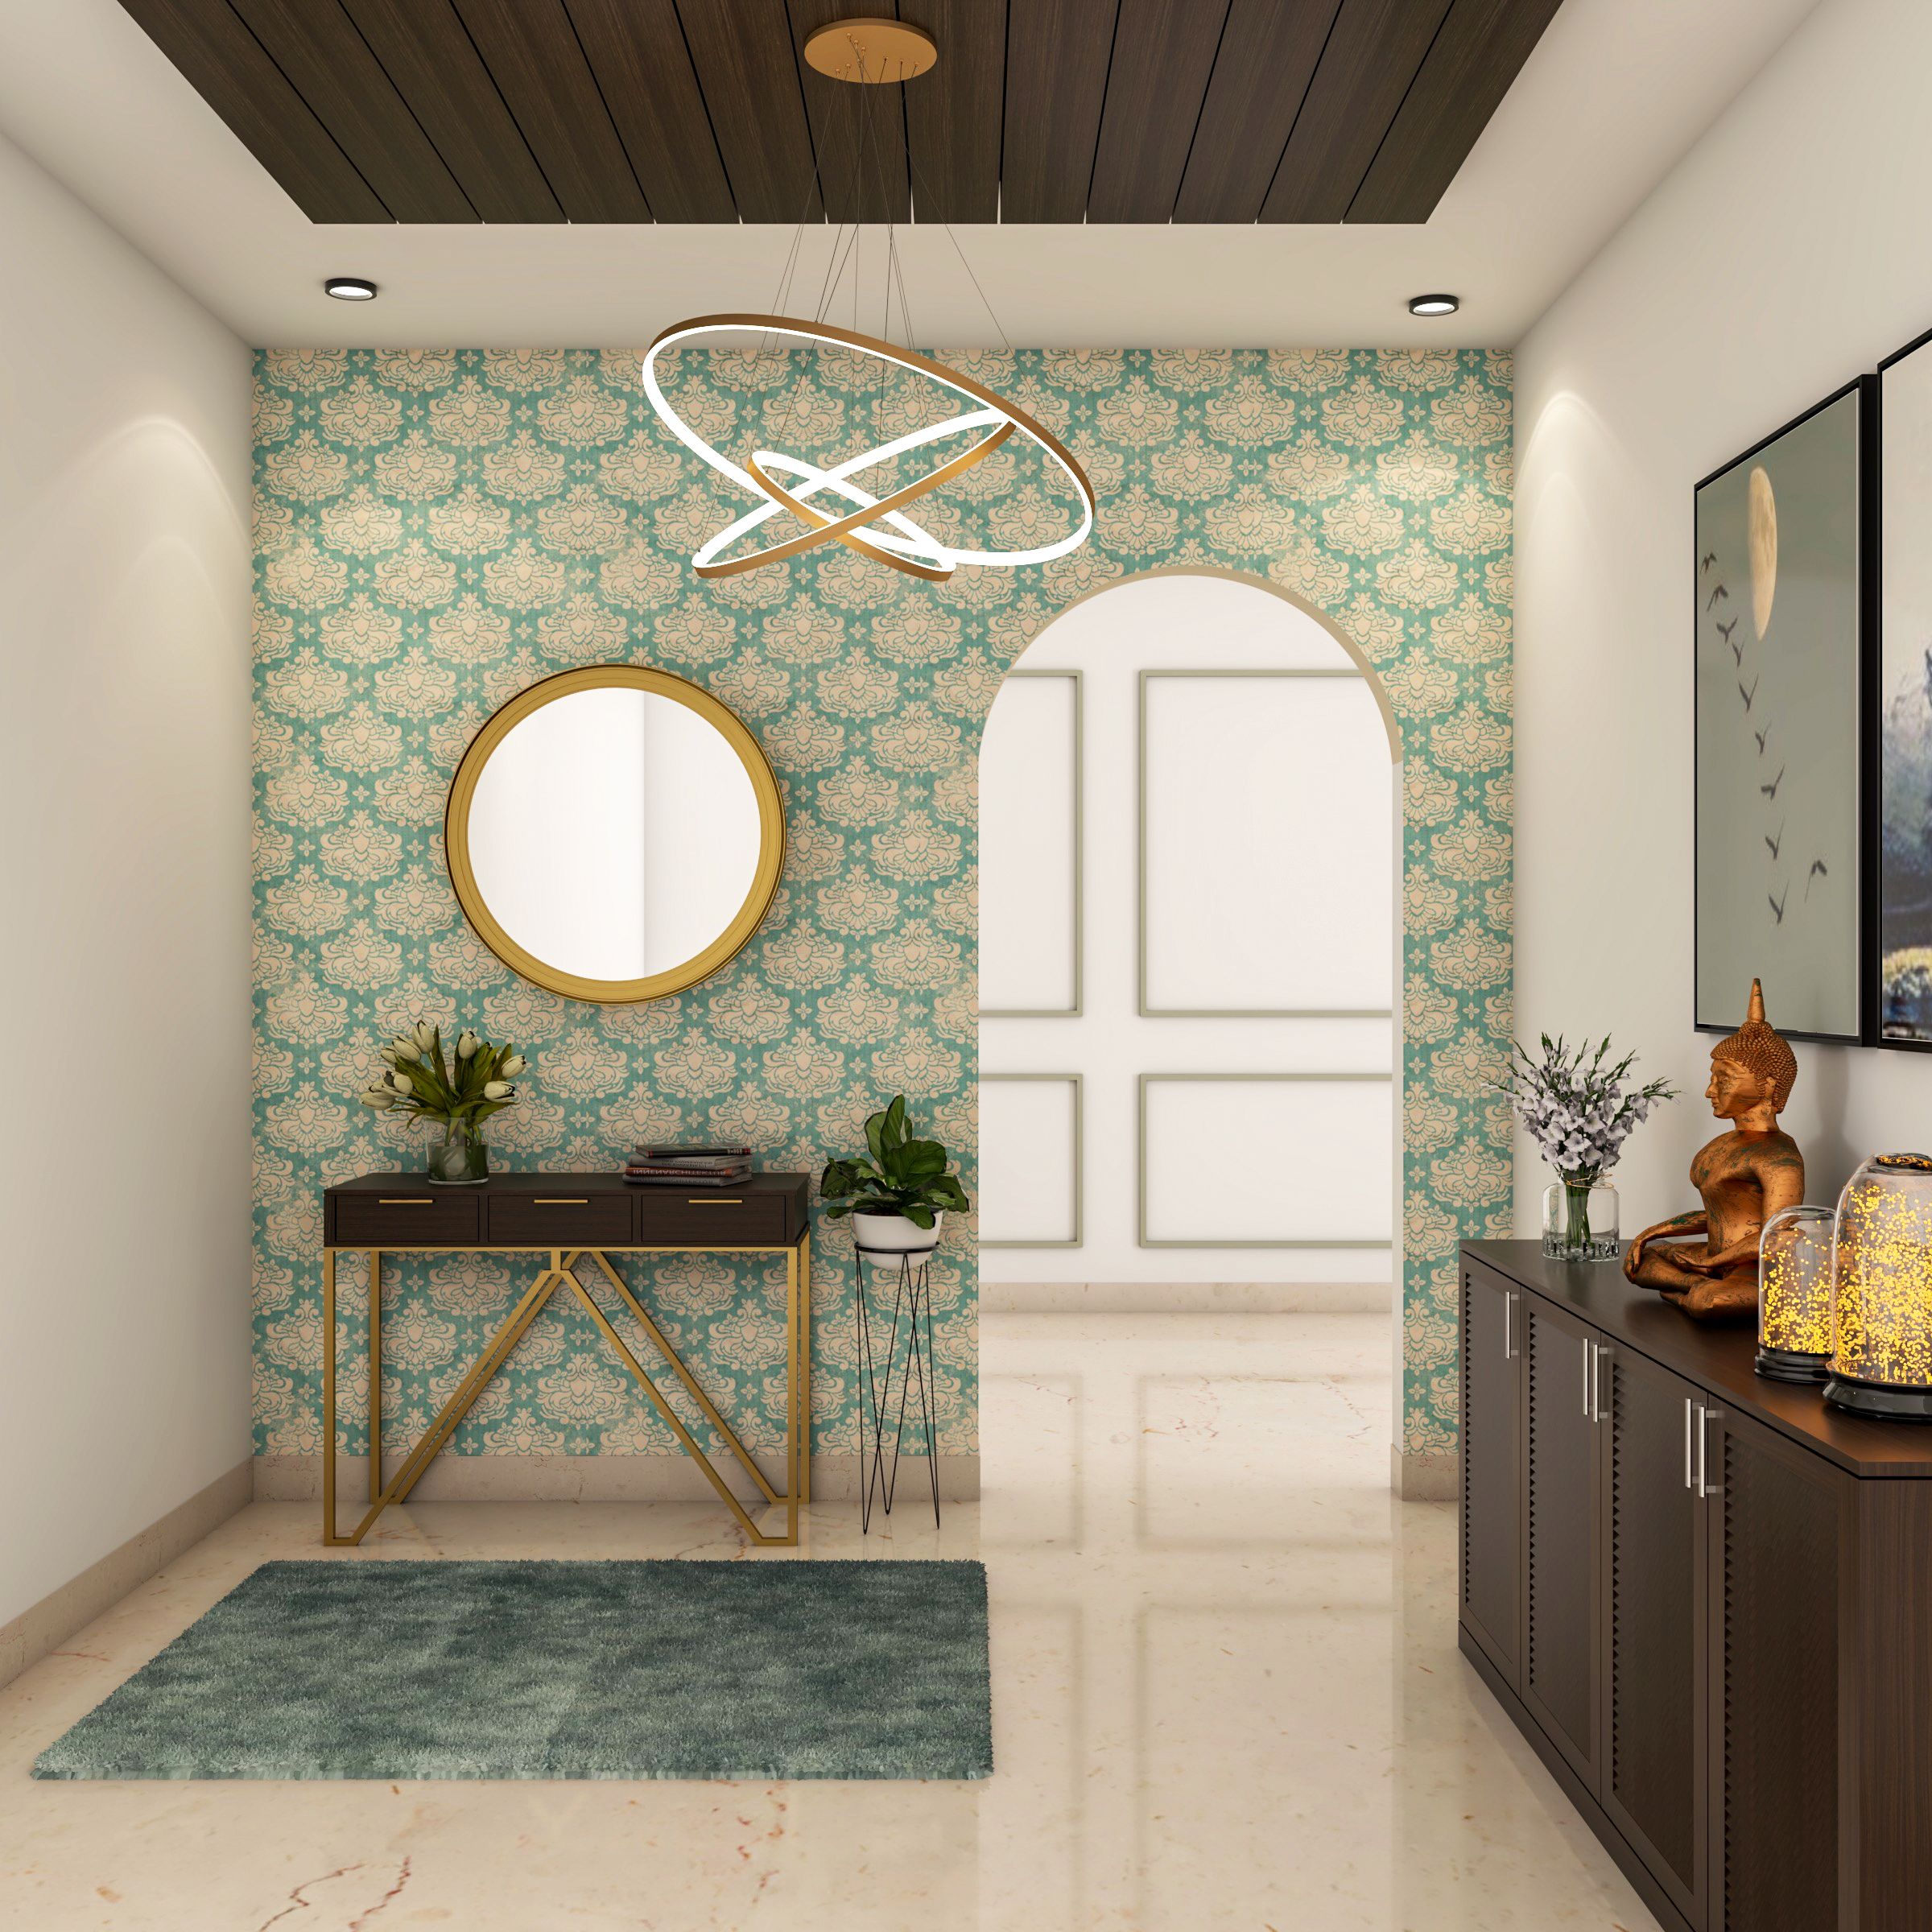 Modern Foyer Design With Wooden Cabinets And Patterned Wallpaper